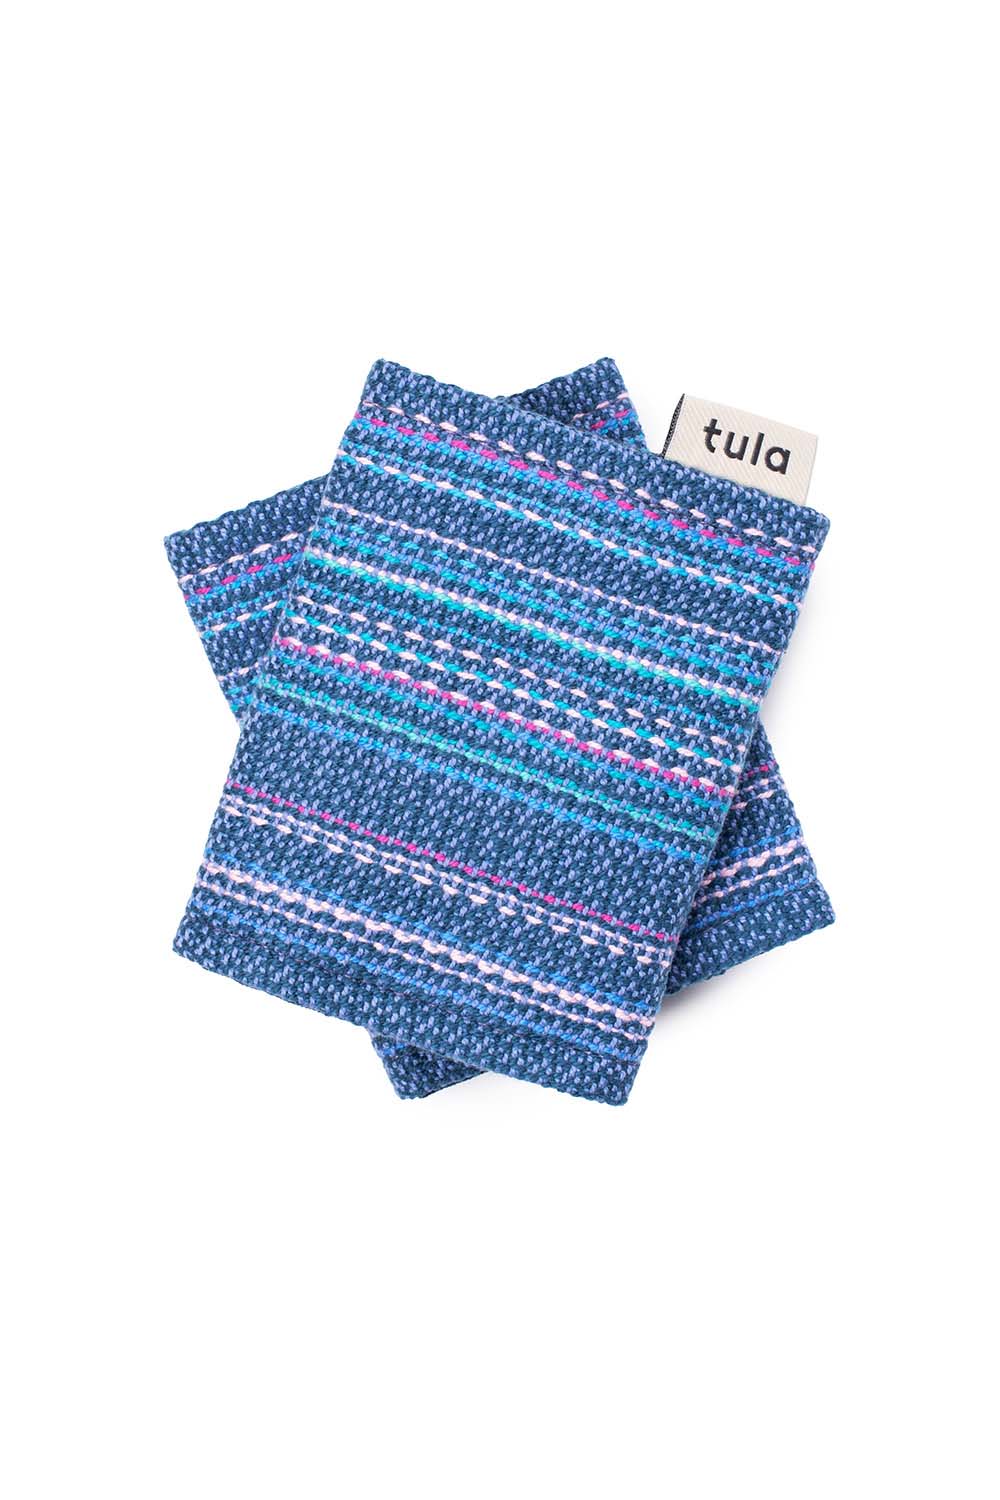 Galaxy - Signature Handwoven Baby Carrier Strap Cover